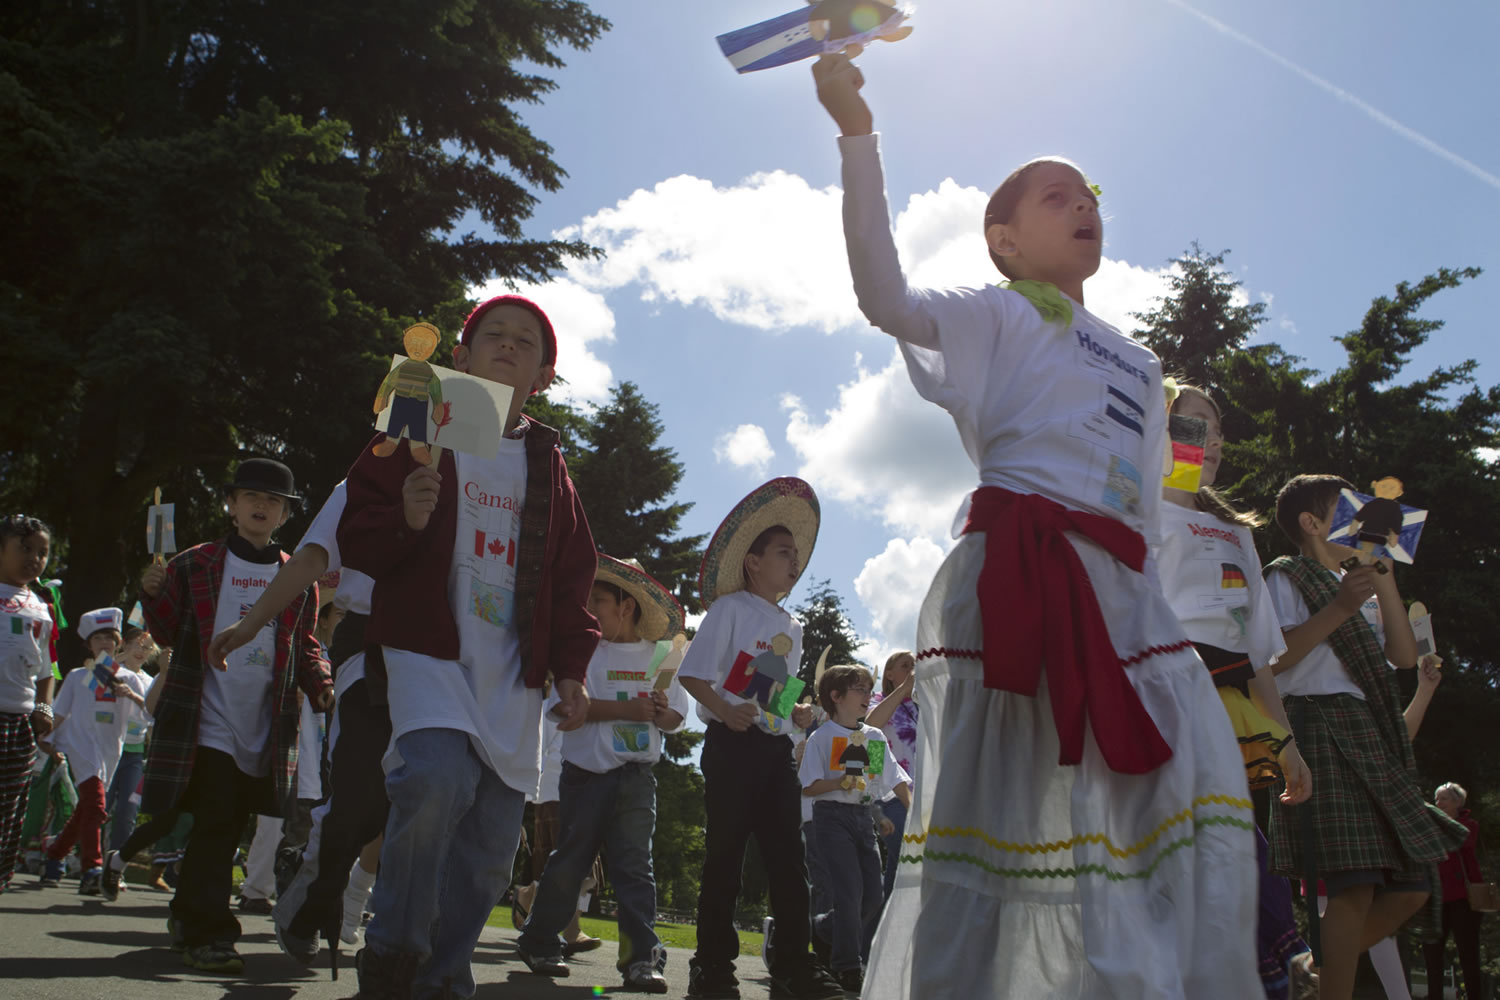 Wearing costumes and carrying flags and dioramas, third-grade students from the Vancouver and Evergreen school districts celebrate their heritage Friday in the annual Children's Cultural Parade at Fort Vancouver.